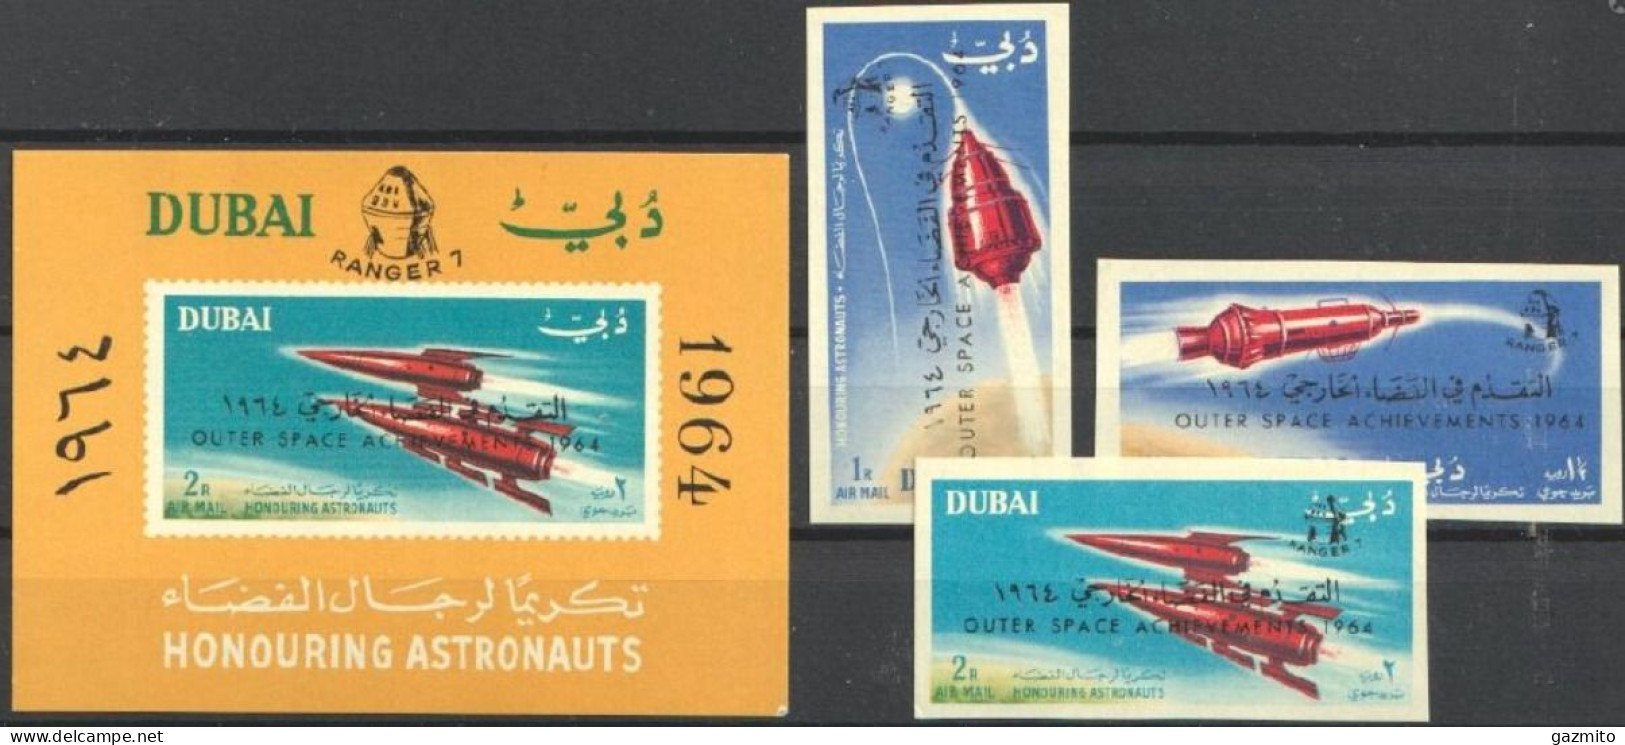 Dubai 1964, Space, Overp. Outer Space Achievement 1964, 3val+BF IMPERFORATED - Asien